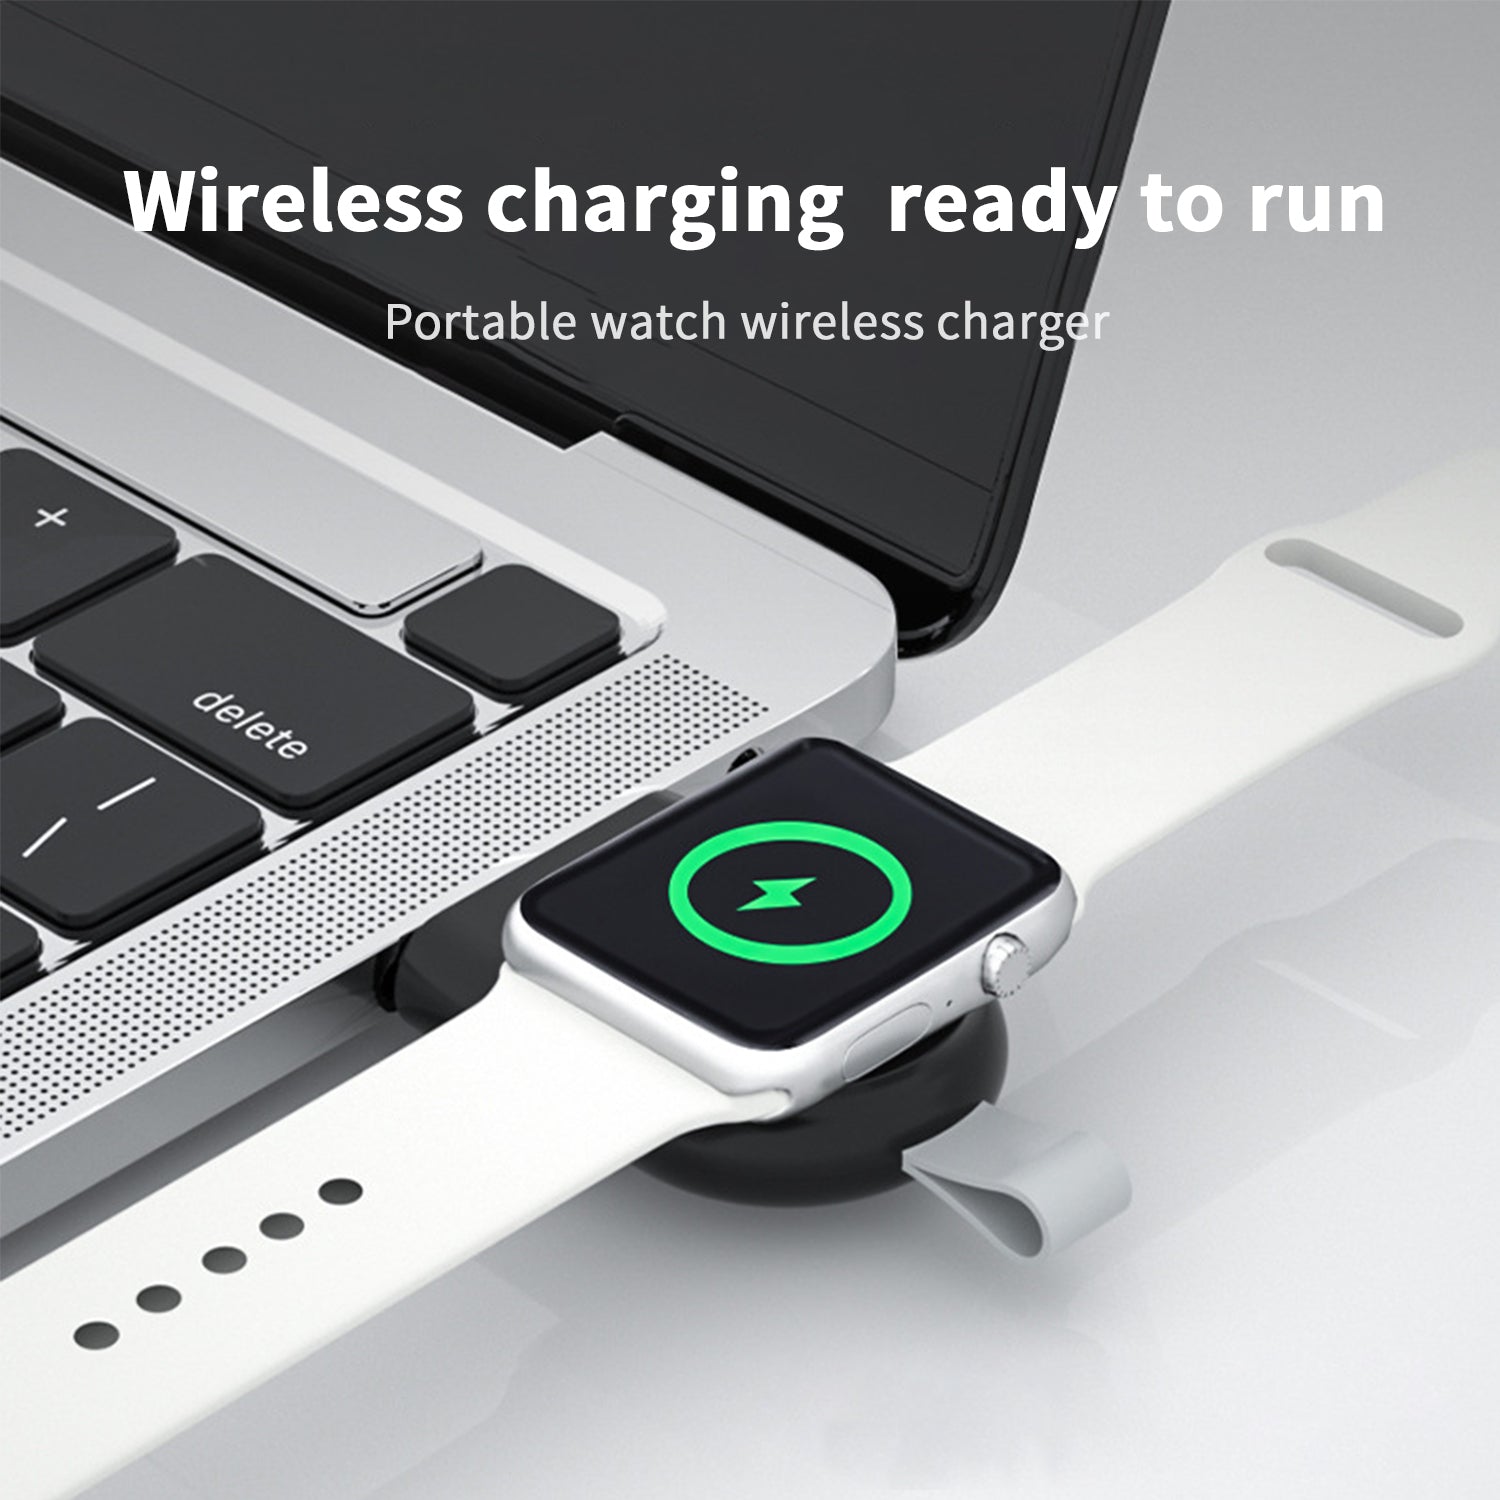 Portable Apple Watch Wireless Charger - Fast Charging, Sturdy Build, Precision